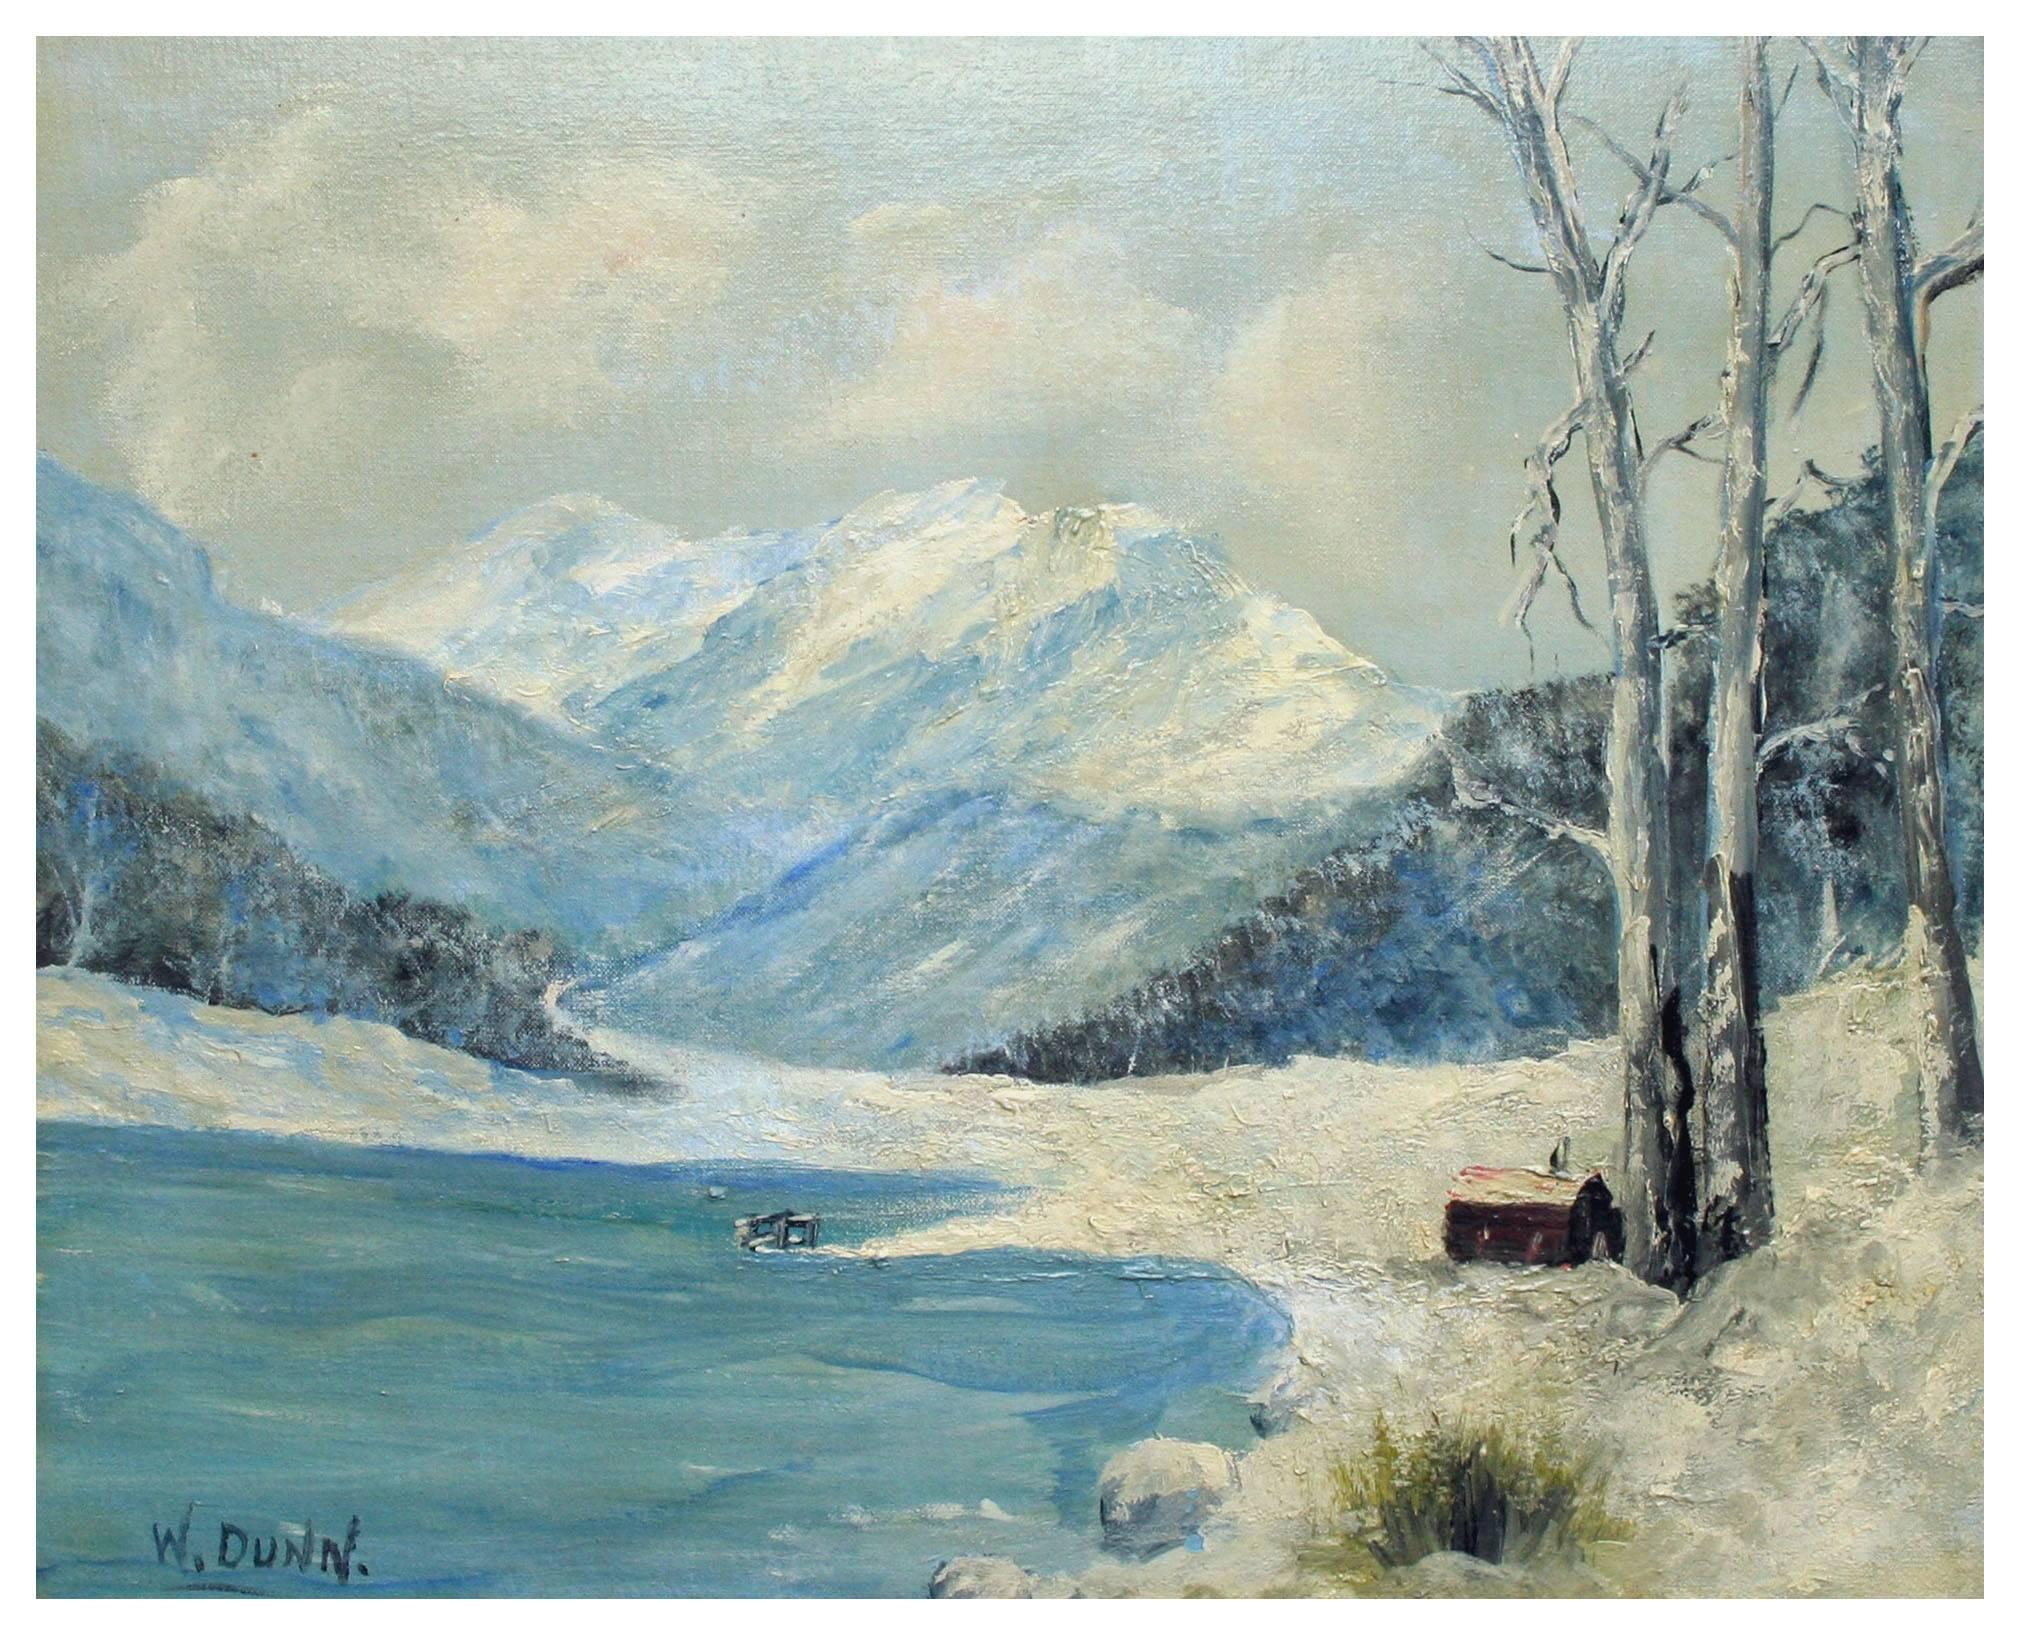 Mountain Lake Cabin in Snow, Mid-Century Winter Landscape - Painting by W. Dunn